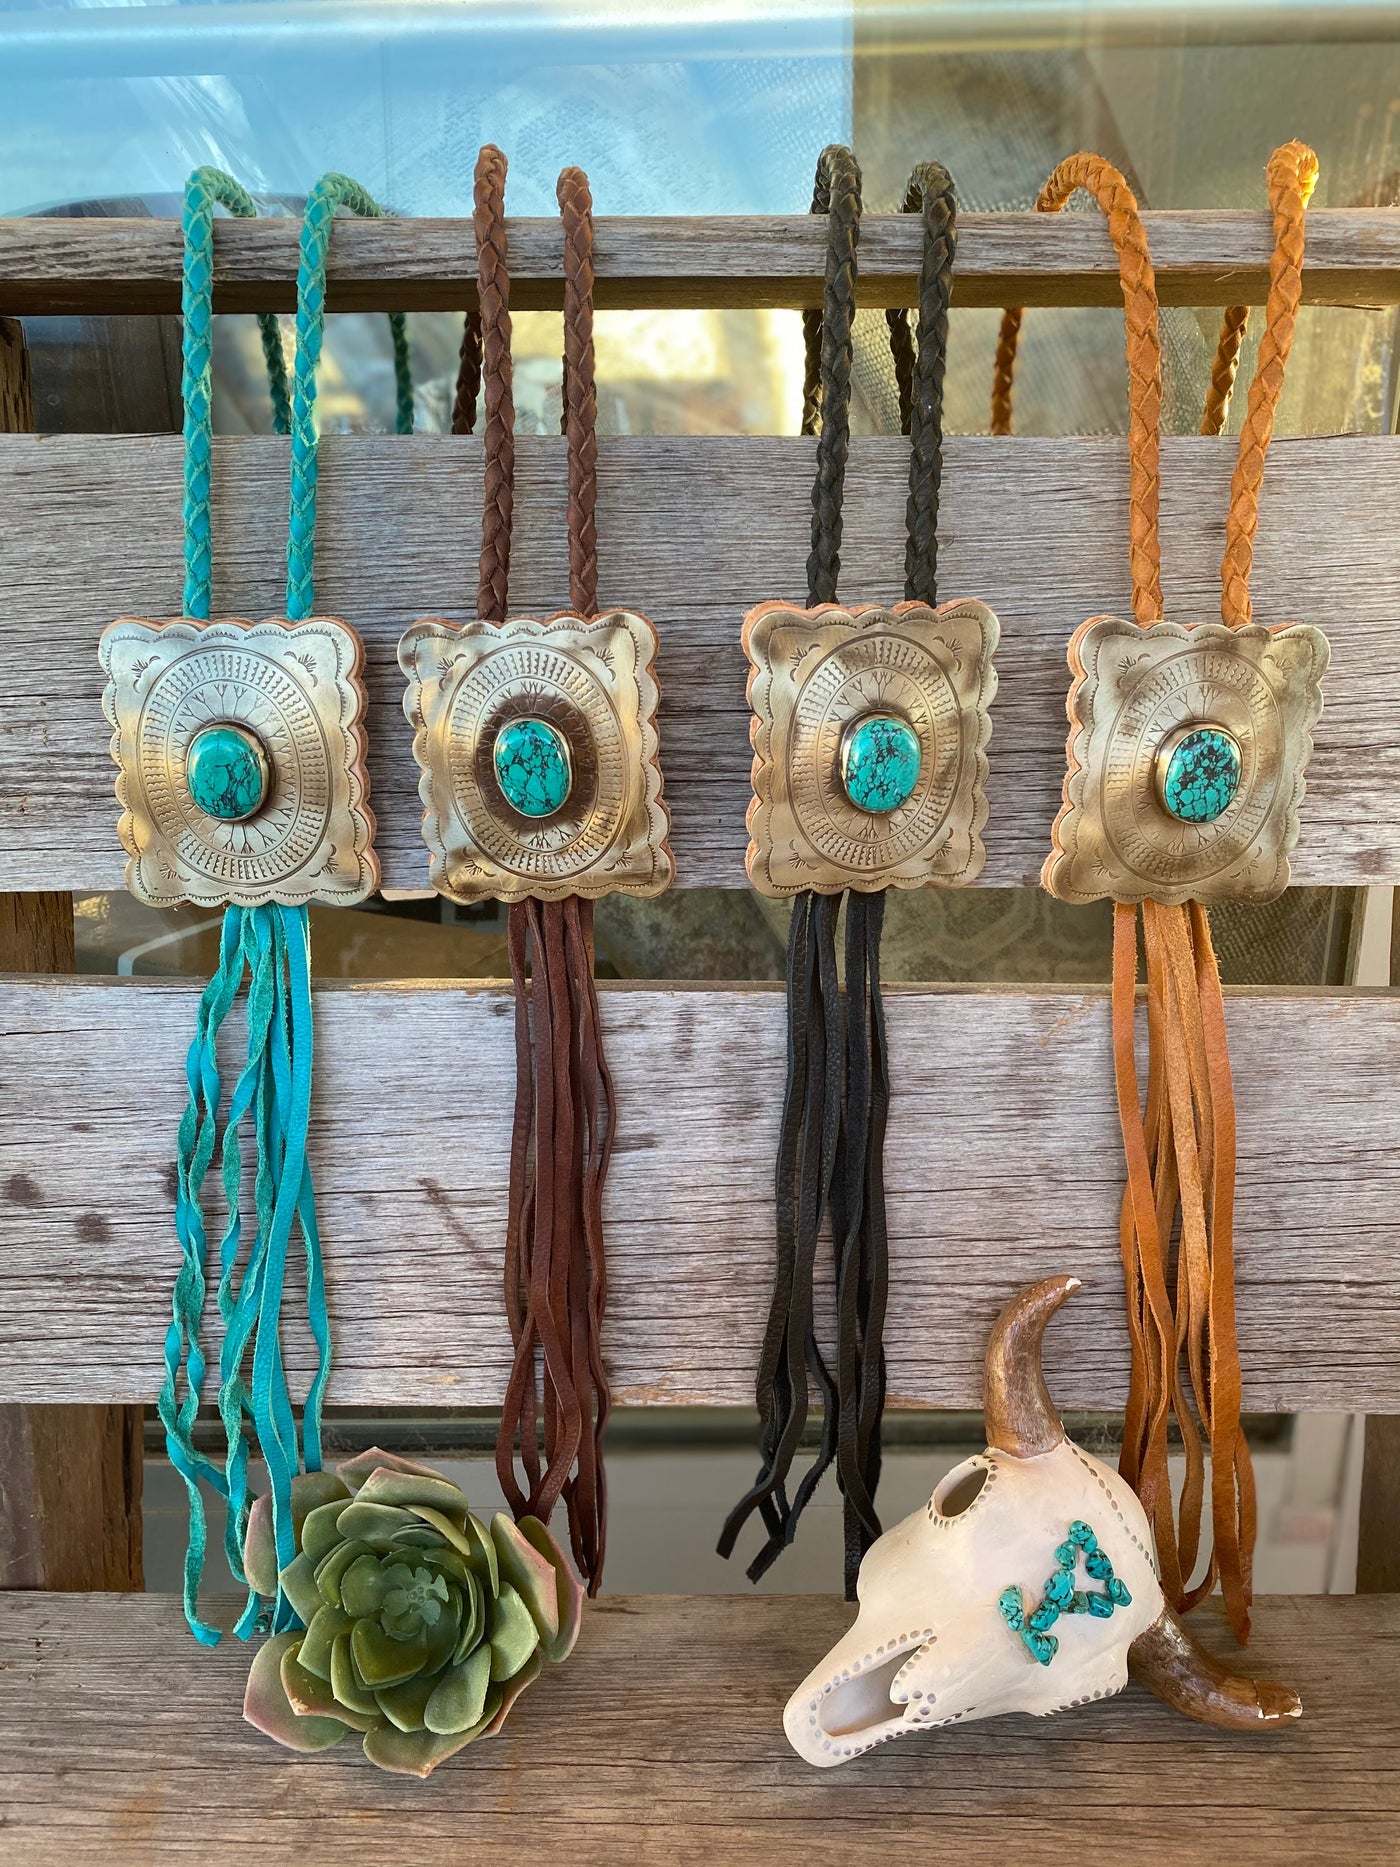 The Outlaw Bolo Necklace - Turquoise